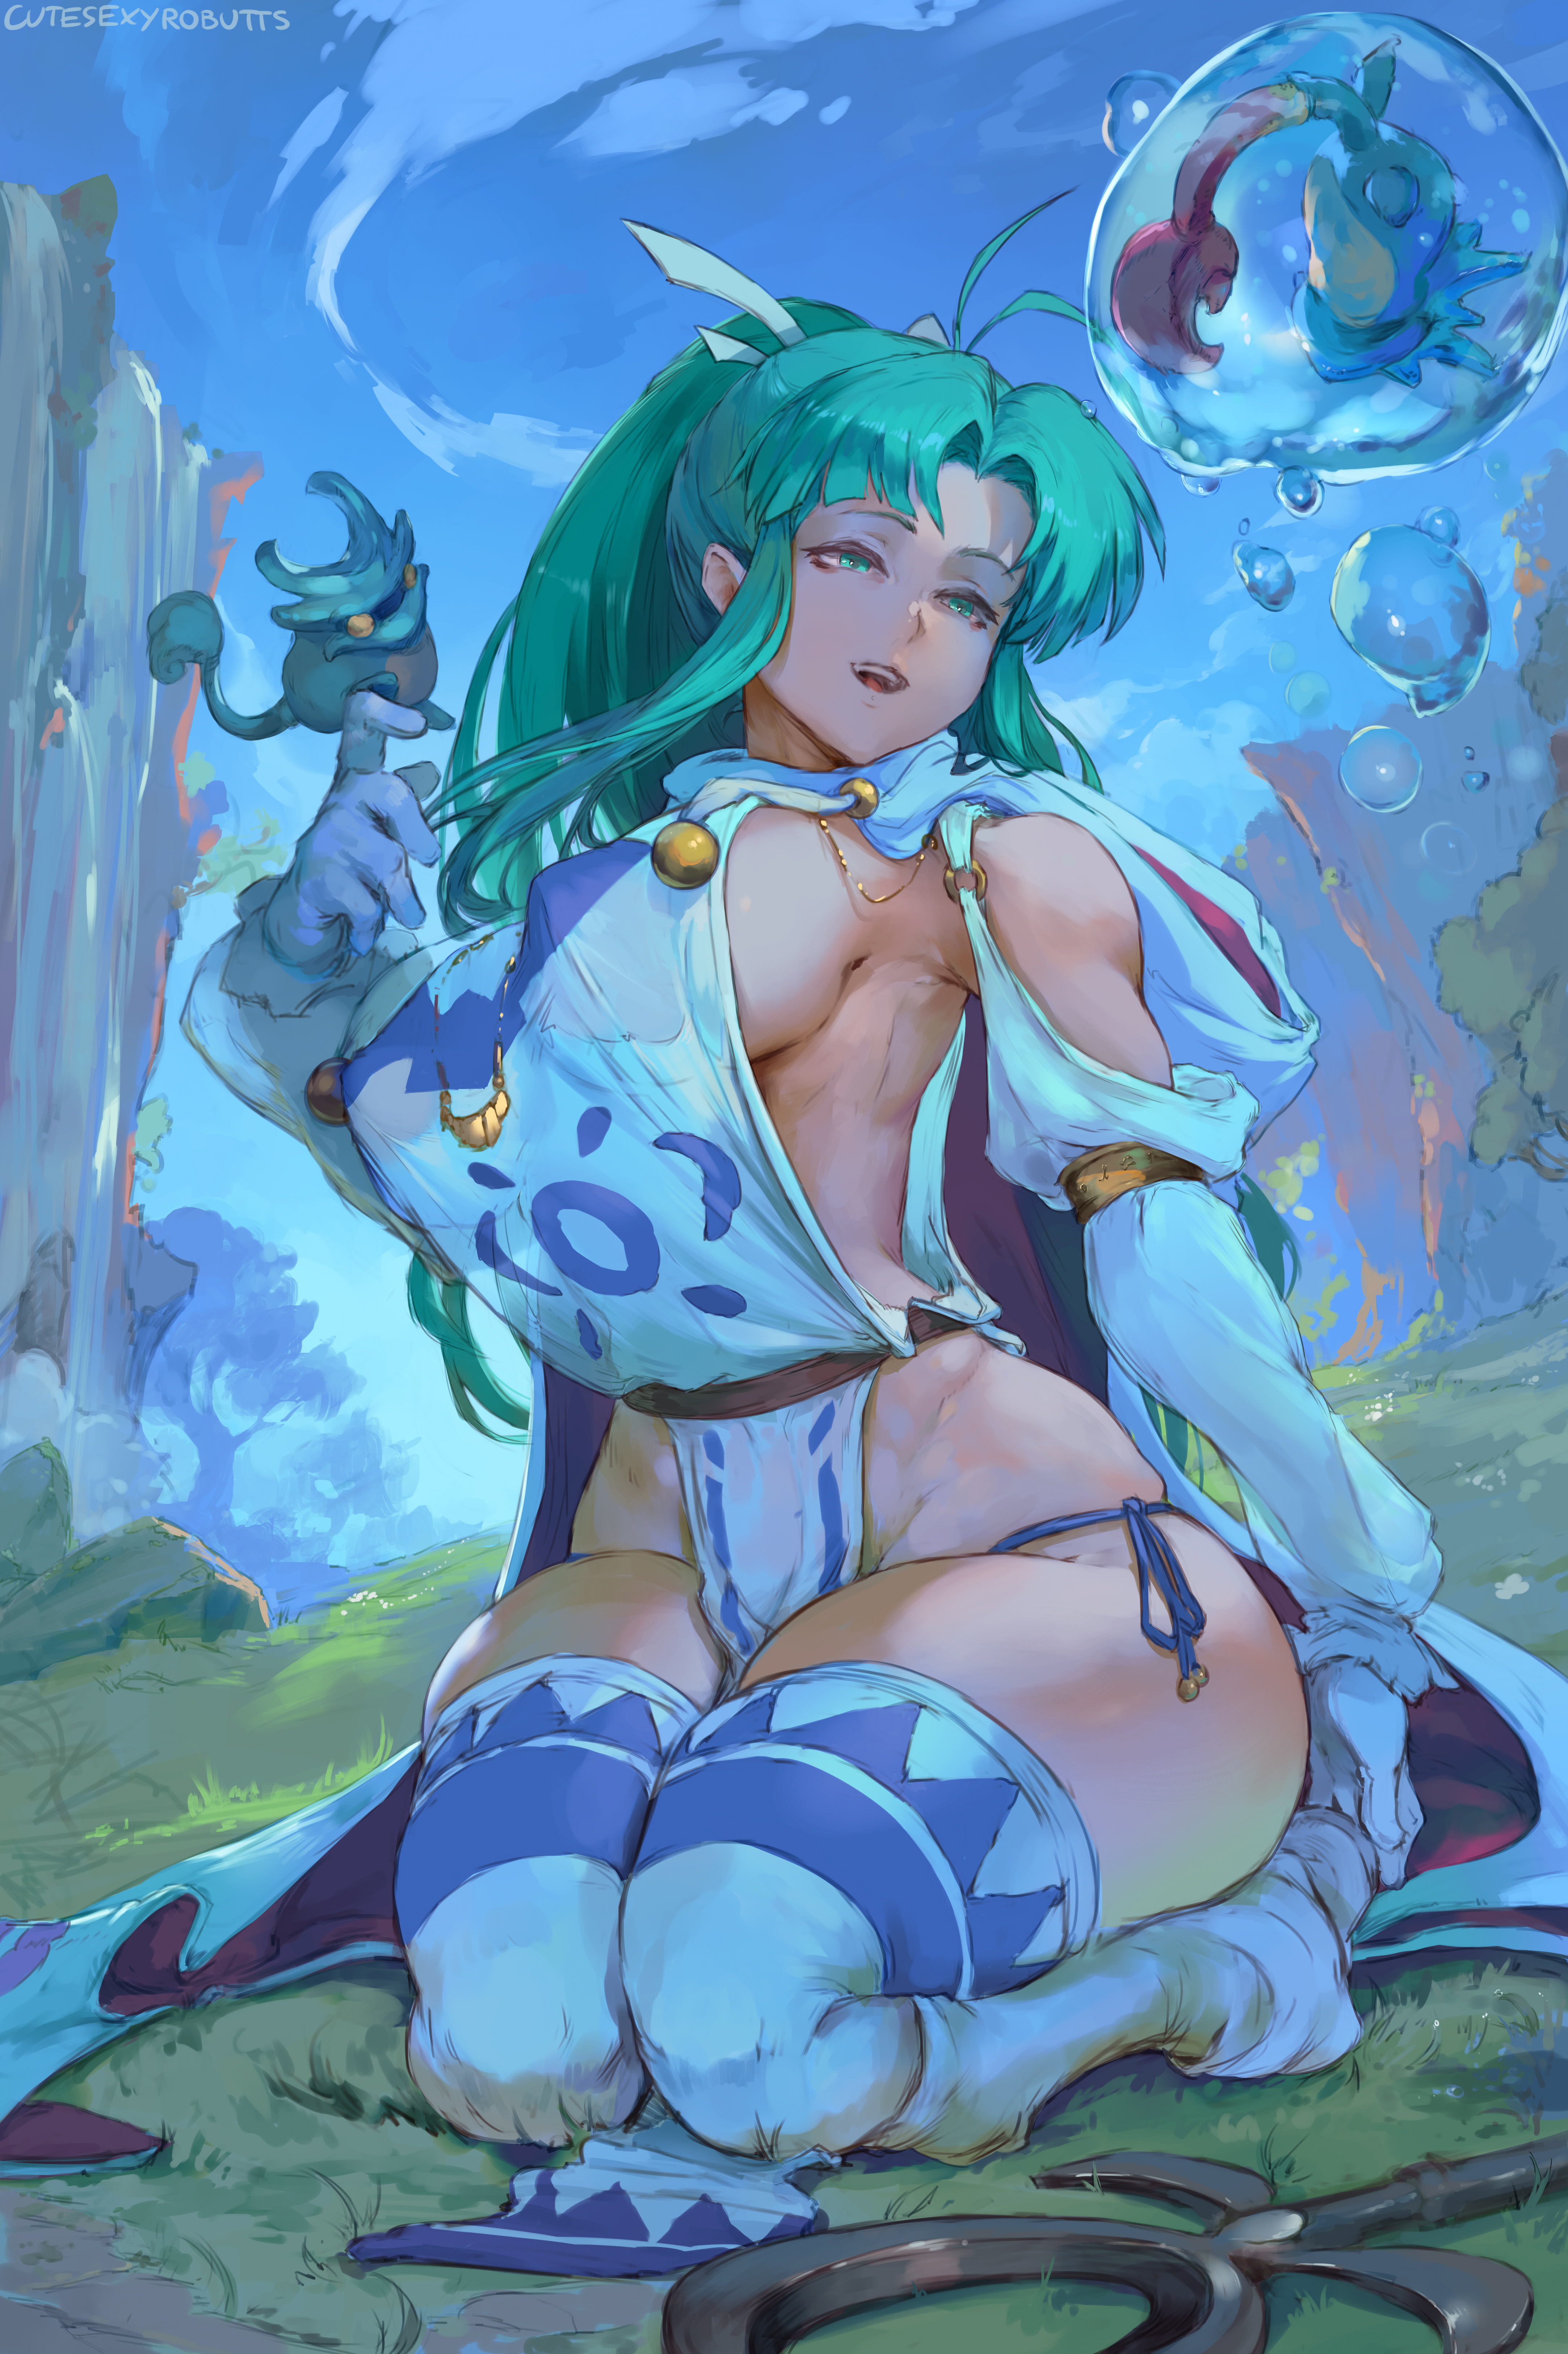 Anime 4331x6500 Mary (Golden Sun) Golden Sun video games video game characters video game girls cyan hair ponytail blue eyes smiling no bra sideboob skimpy clothes nipple bulge thick thigh thigh-highs kneeling curvy sky portrait display 2D artwork drawing digital art illustration fan art Cutesexyrobutts looking at viewer blue